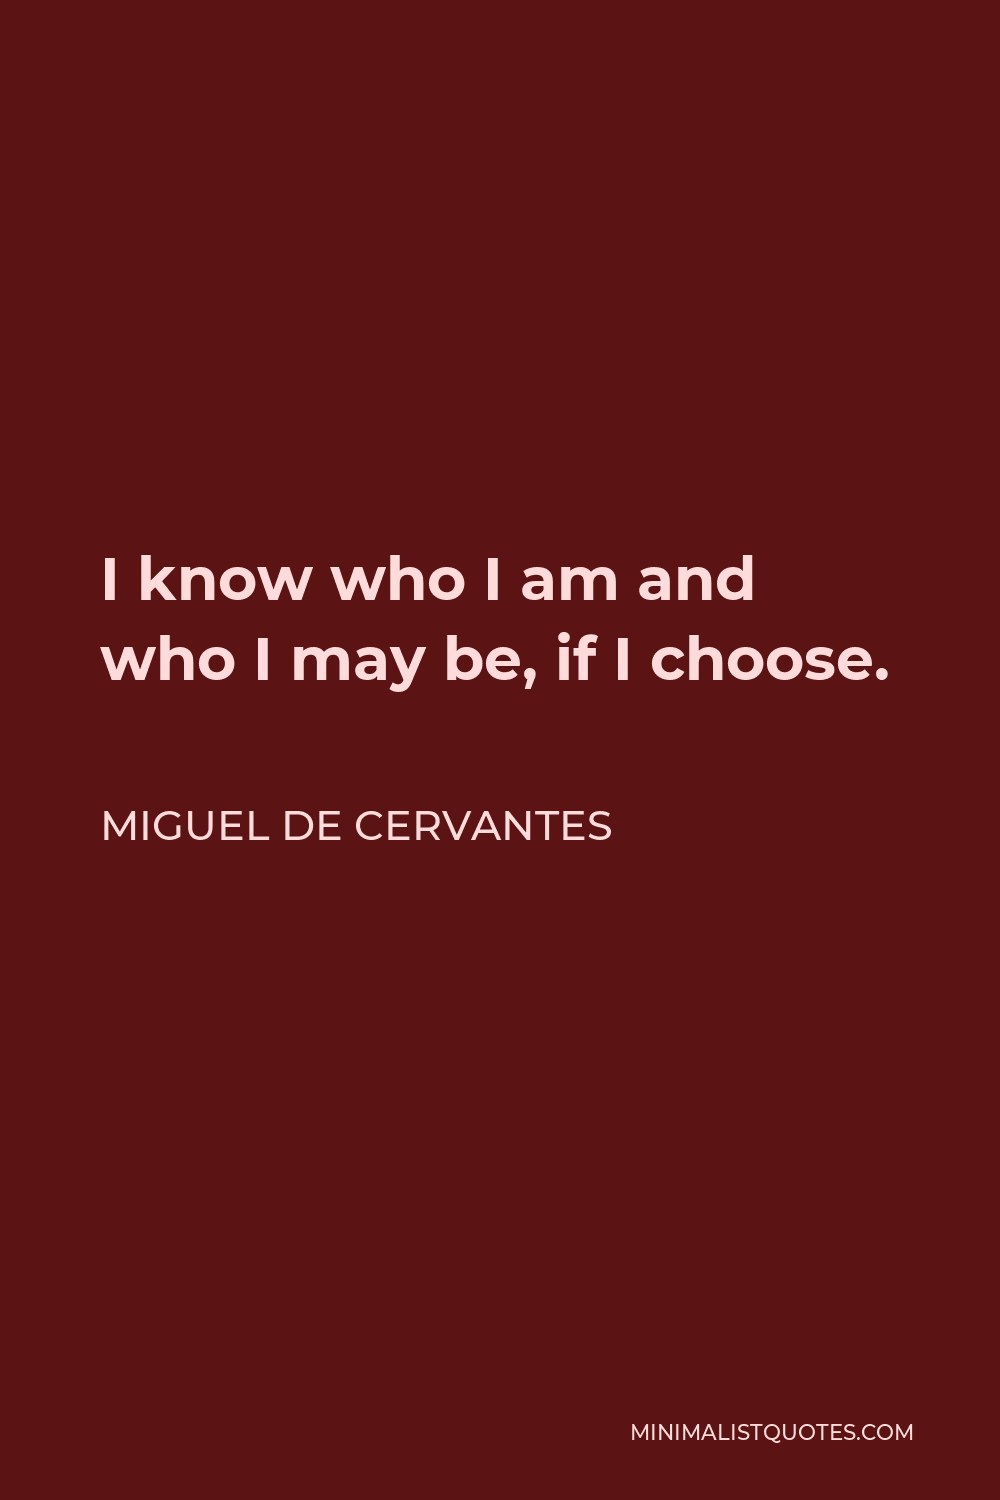 Miguel de Cervantes Quote - I know who I am and who I may be, if I choose.